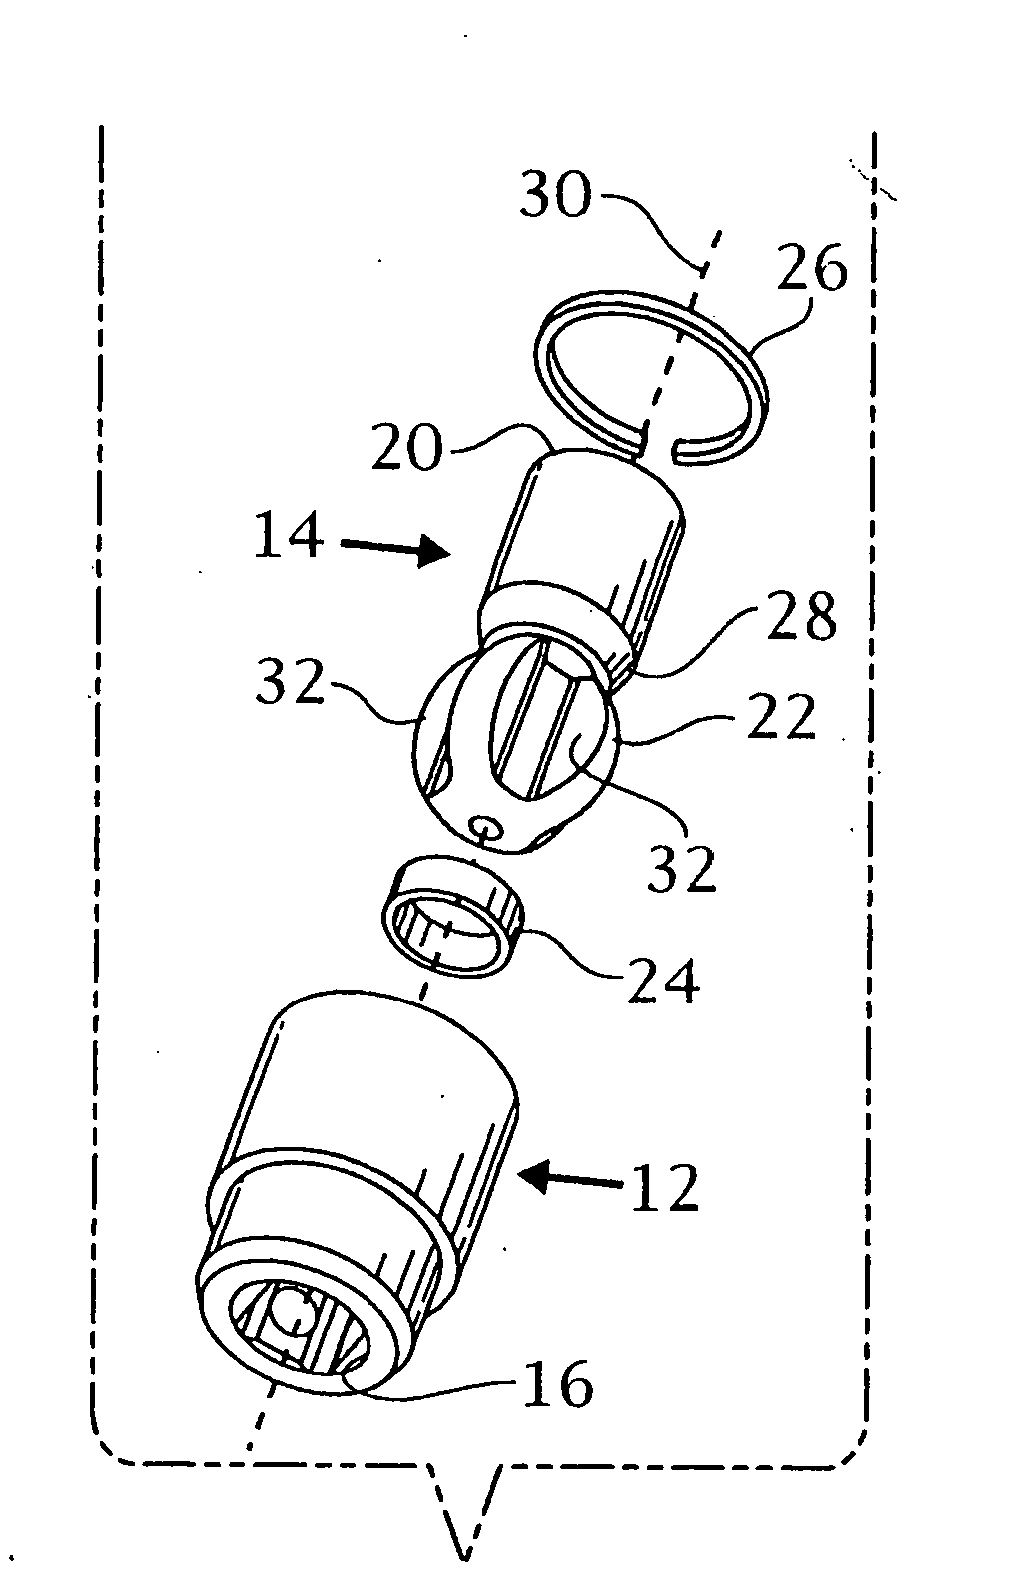 Universal joint